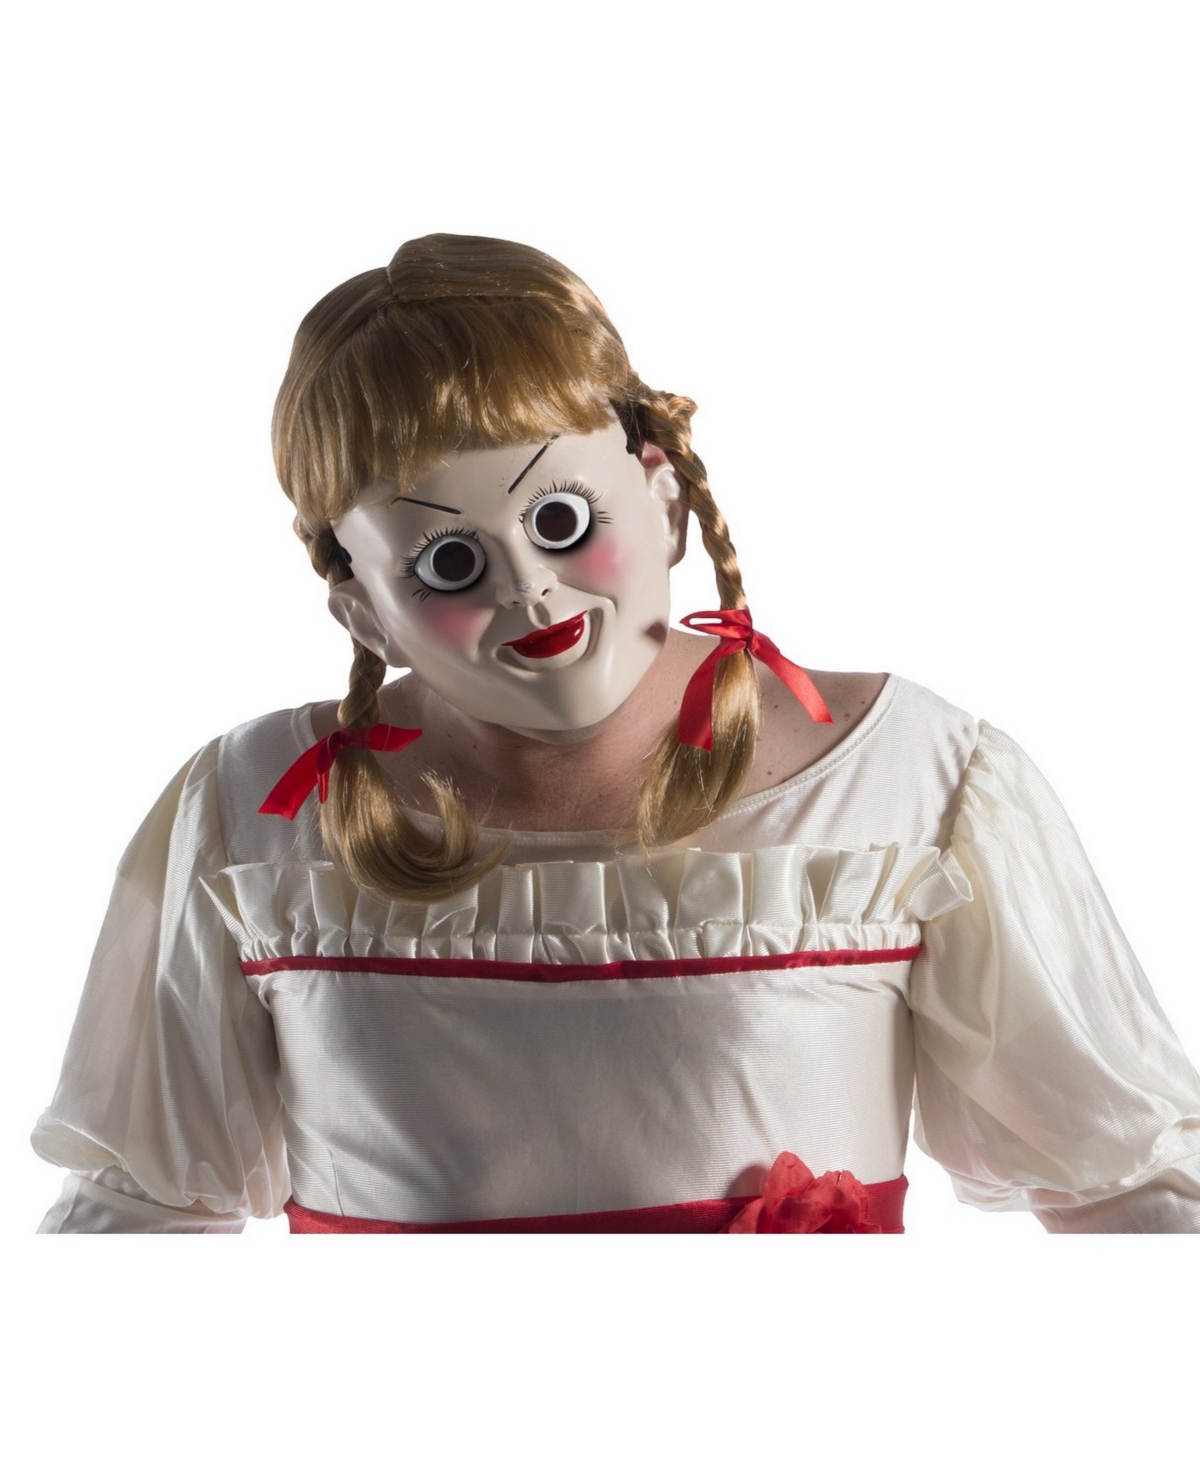 BuySeason Women's Annabelle- Creation Annabelle Mask With Wig - White